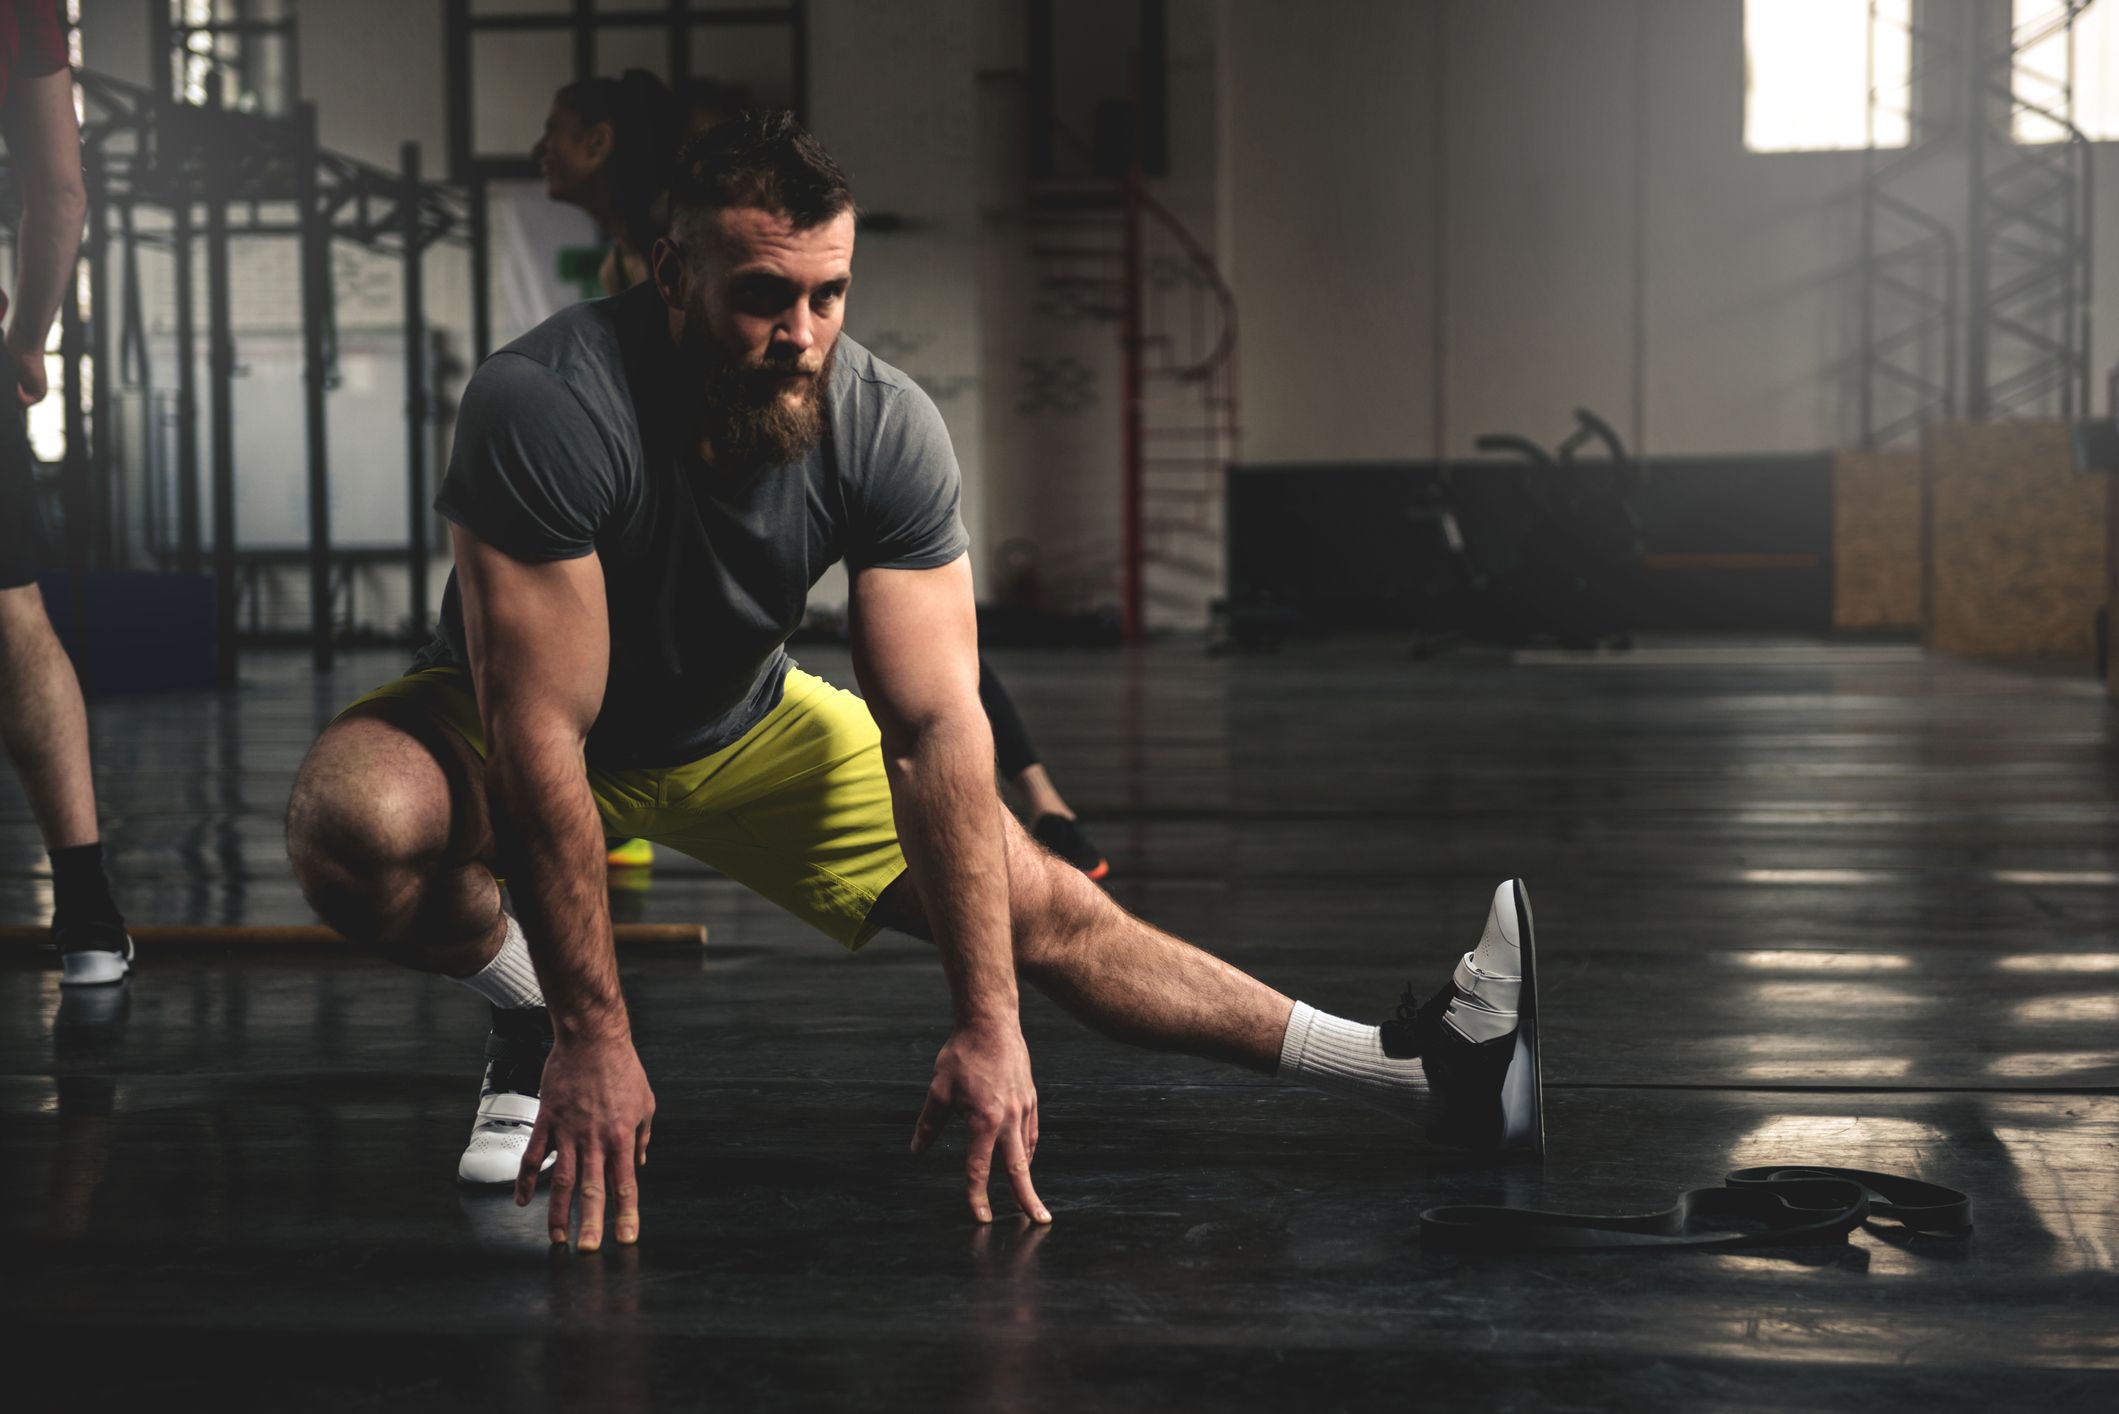 The 5 best stretches to open your hips before lifting - Men's Journal